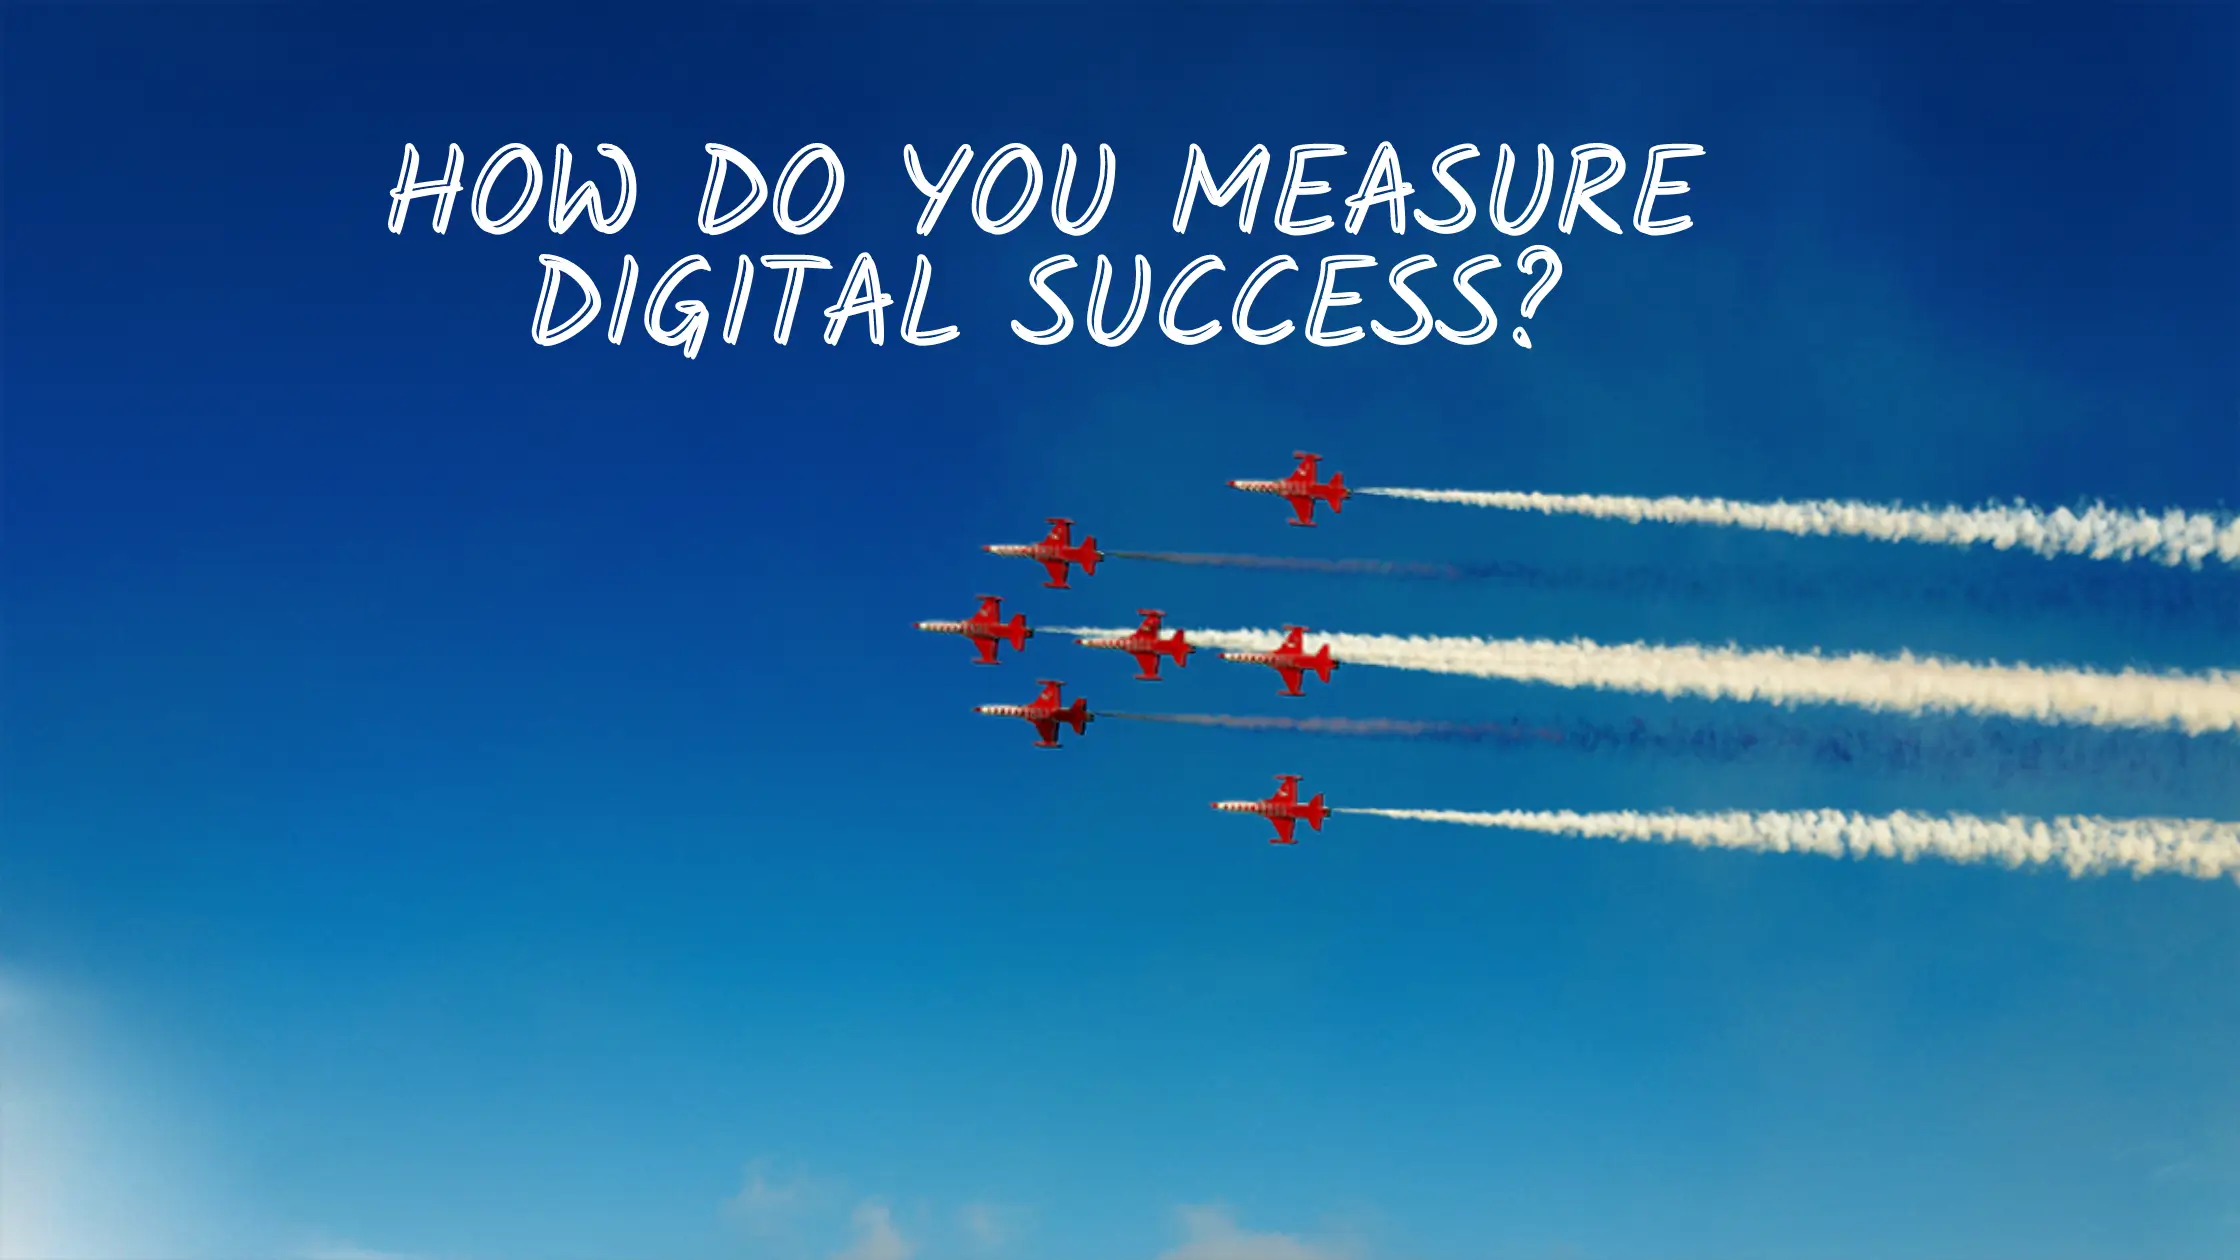 How to Measure a Successful Digital Transformation